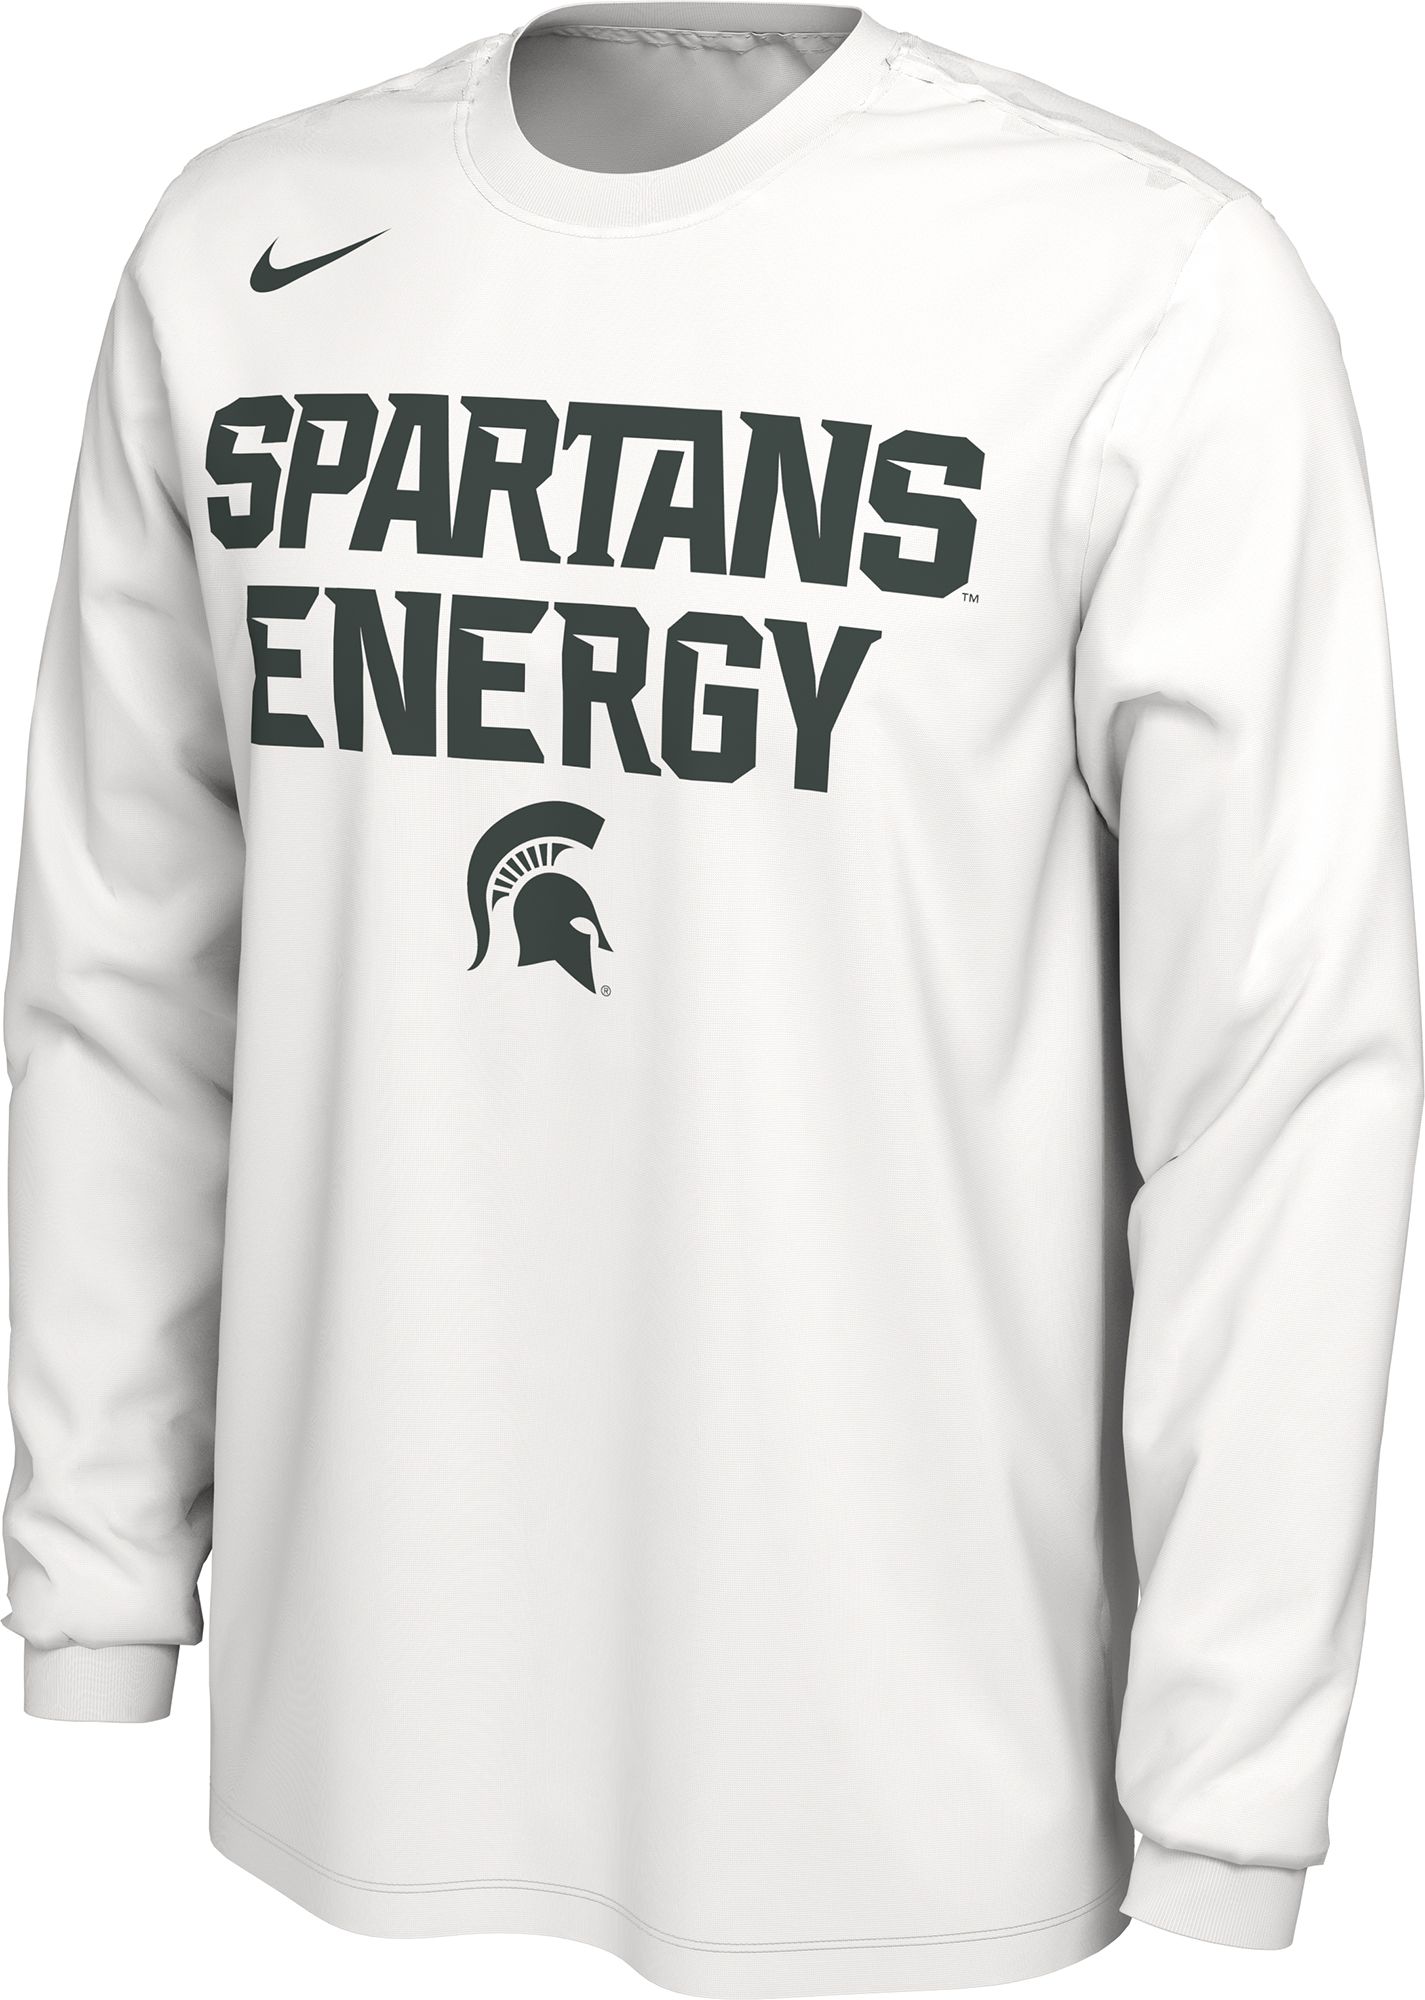 Nike Men's Michigan State Spartans White Dri-FIT 'Energy' Bench Long Sleeve T-Shirt